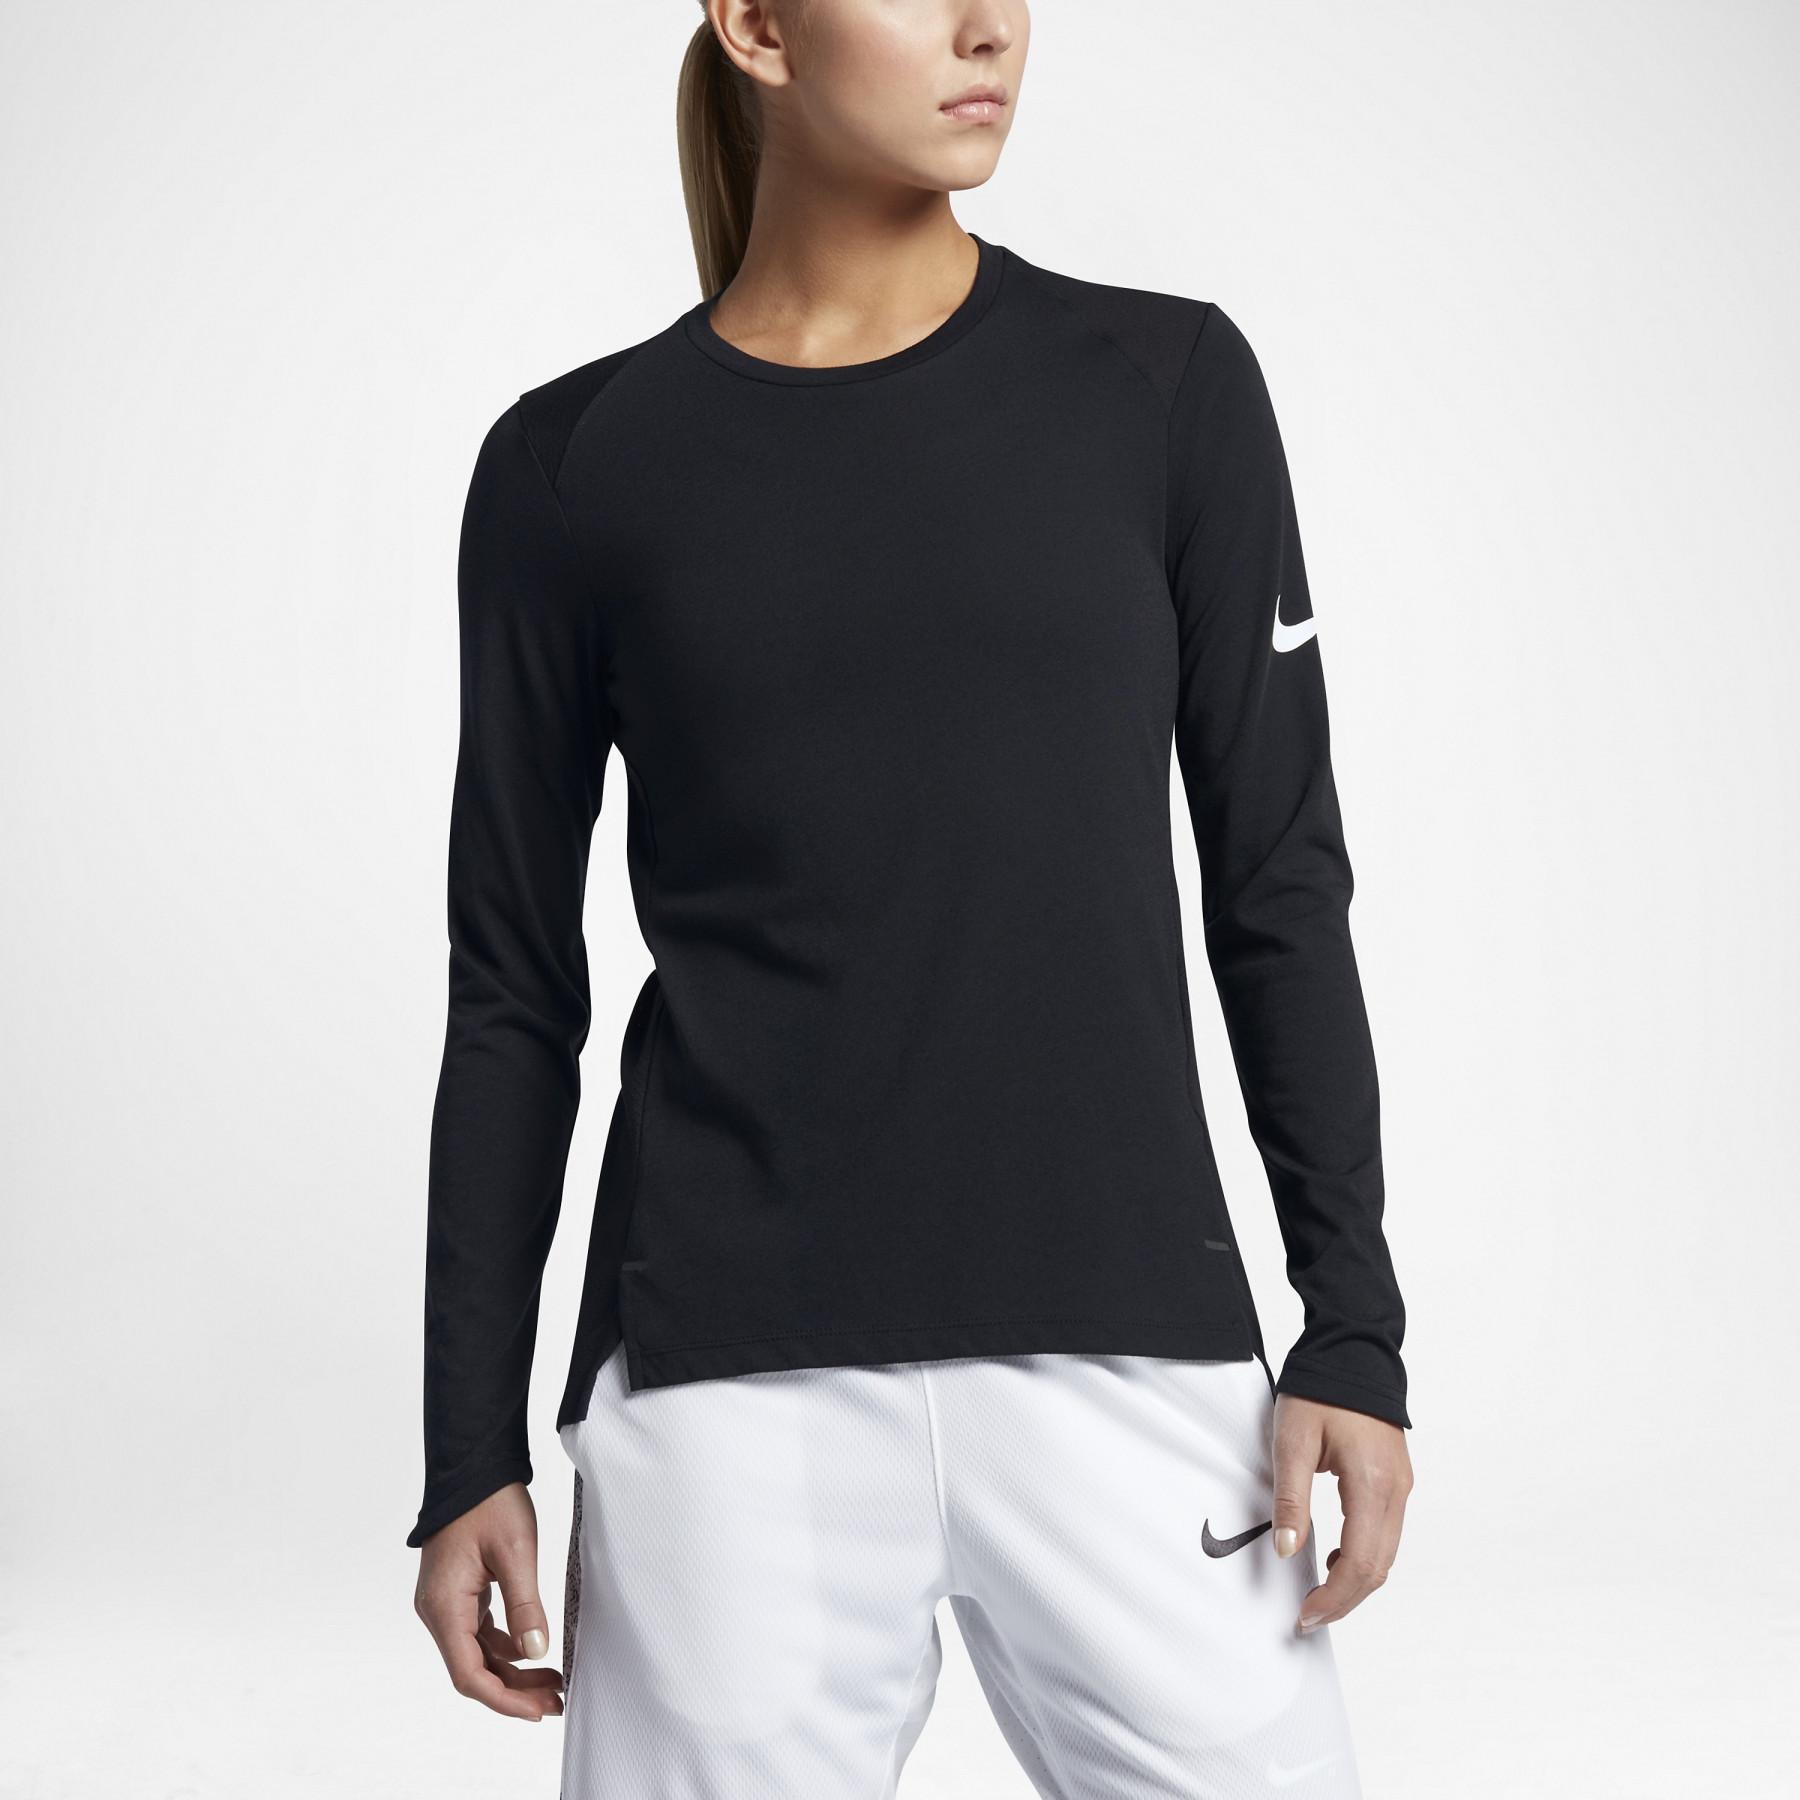 Maillot manches longues femme Nike Dry Elite